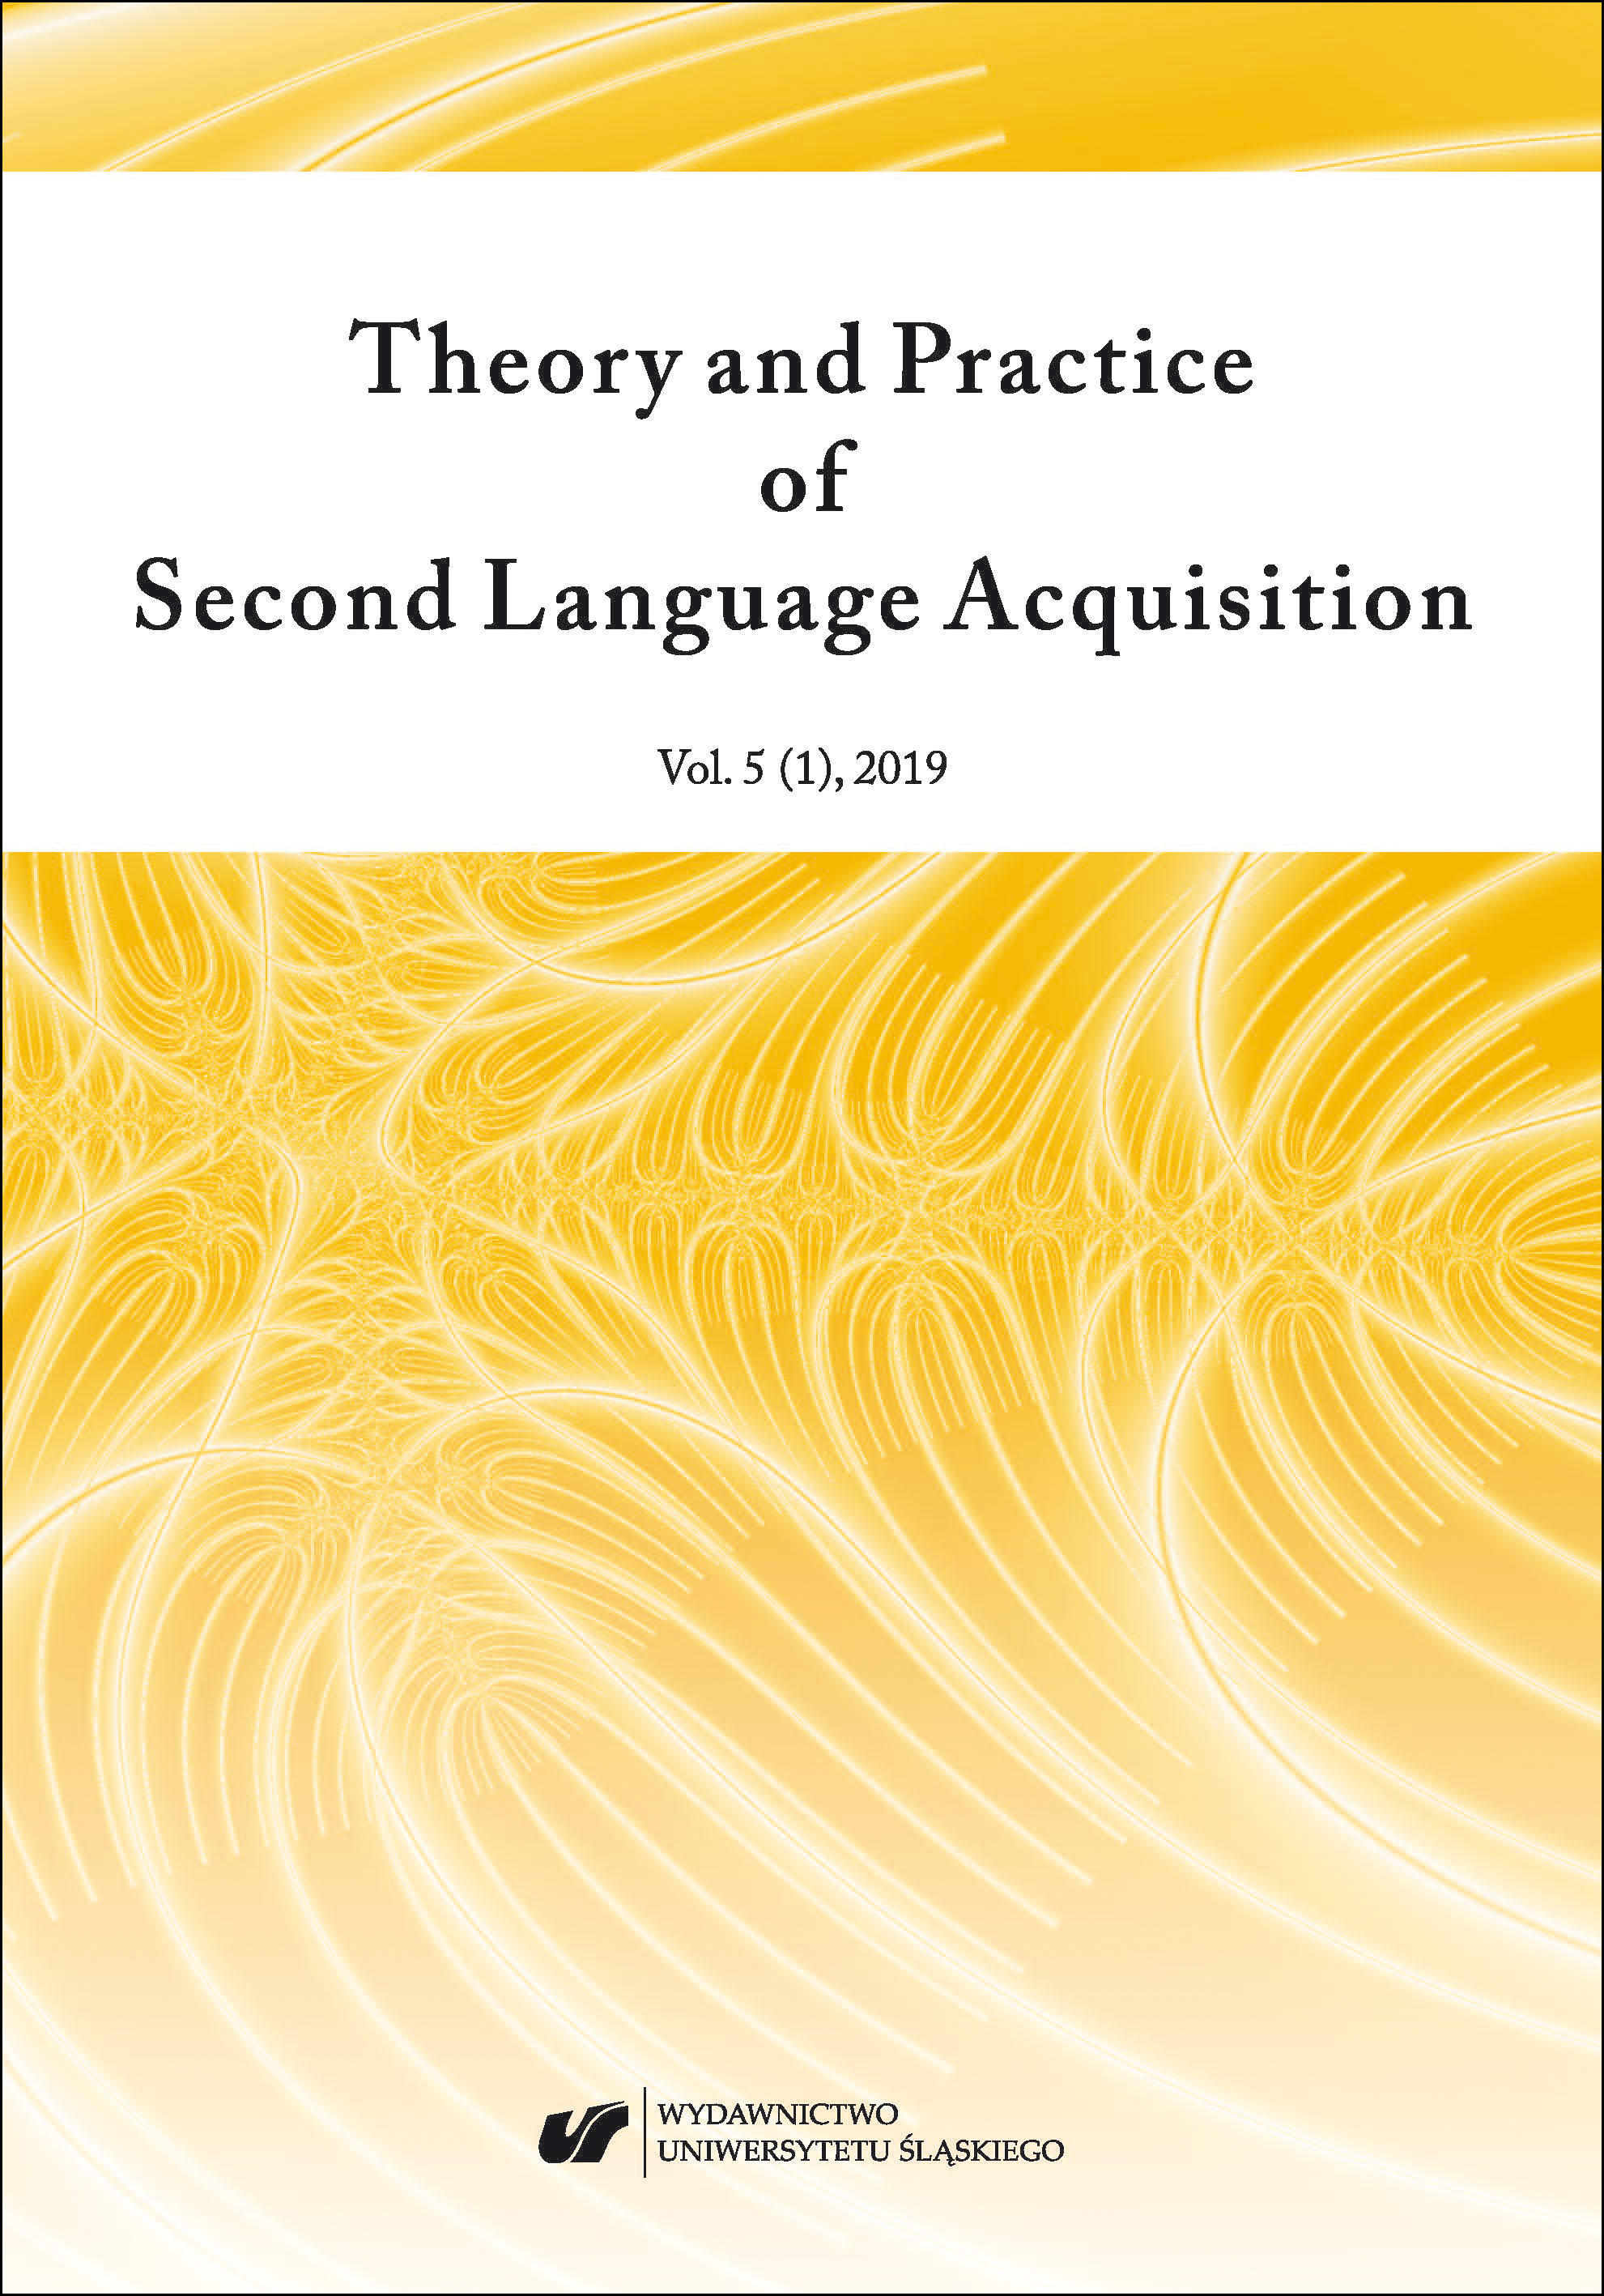 Danuta Wiśniewska, Action Research in EFL Pedagogy: Theory and Analysis of Practice. Poznań: Wydawnictwo Naukowe UAM, 2013, ISBN: 9788323226123, 414 pages Cover Image